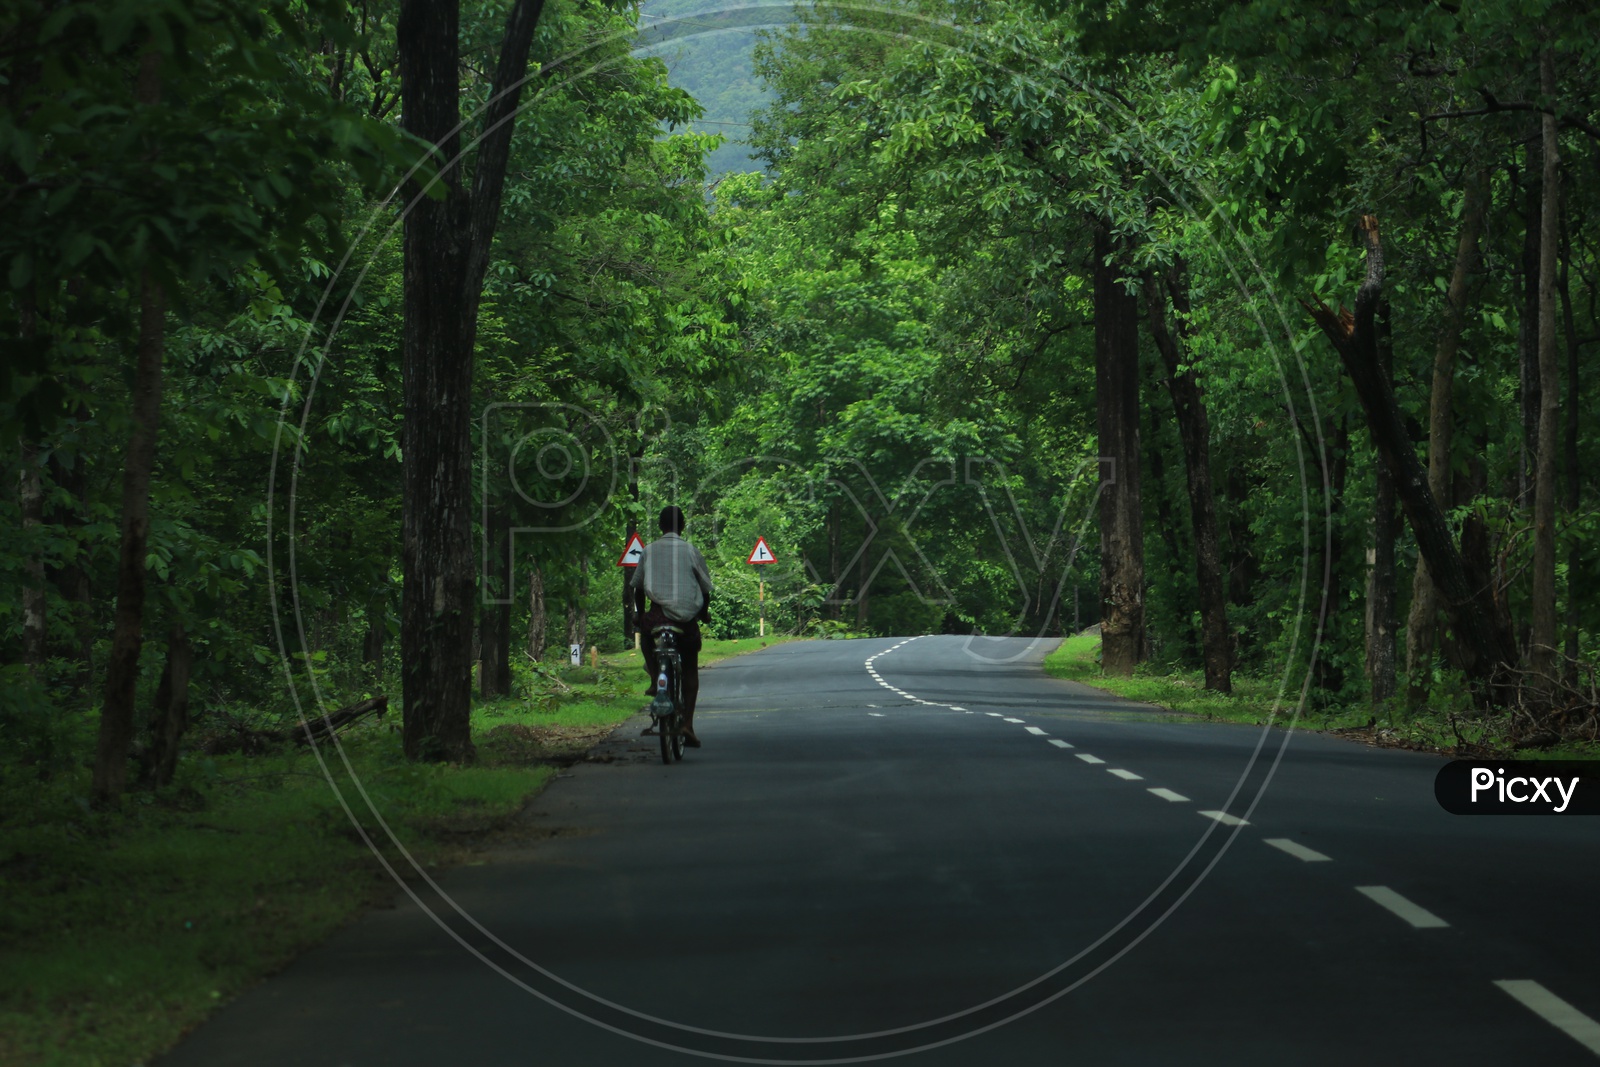 A bicycle on a road covered with green trees on either side